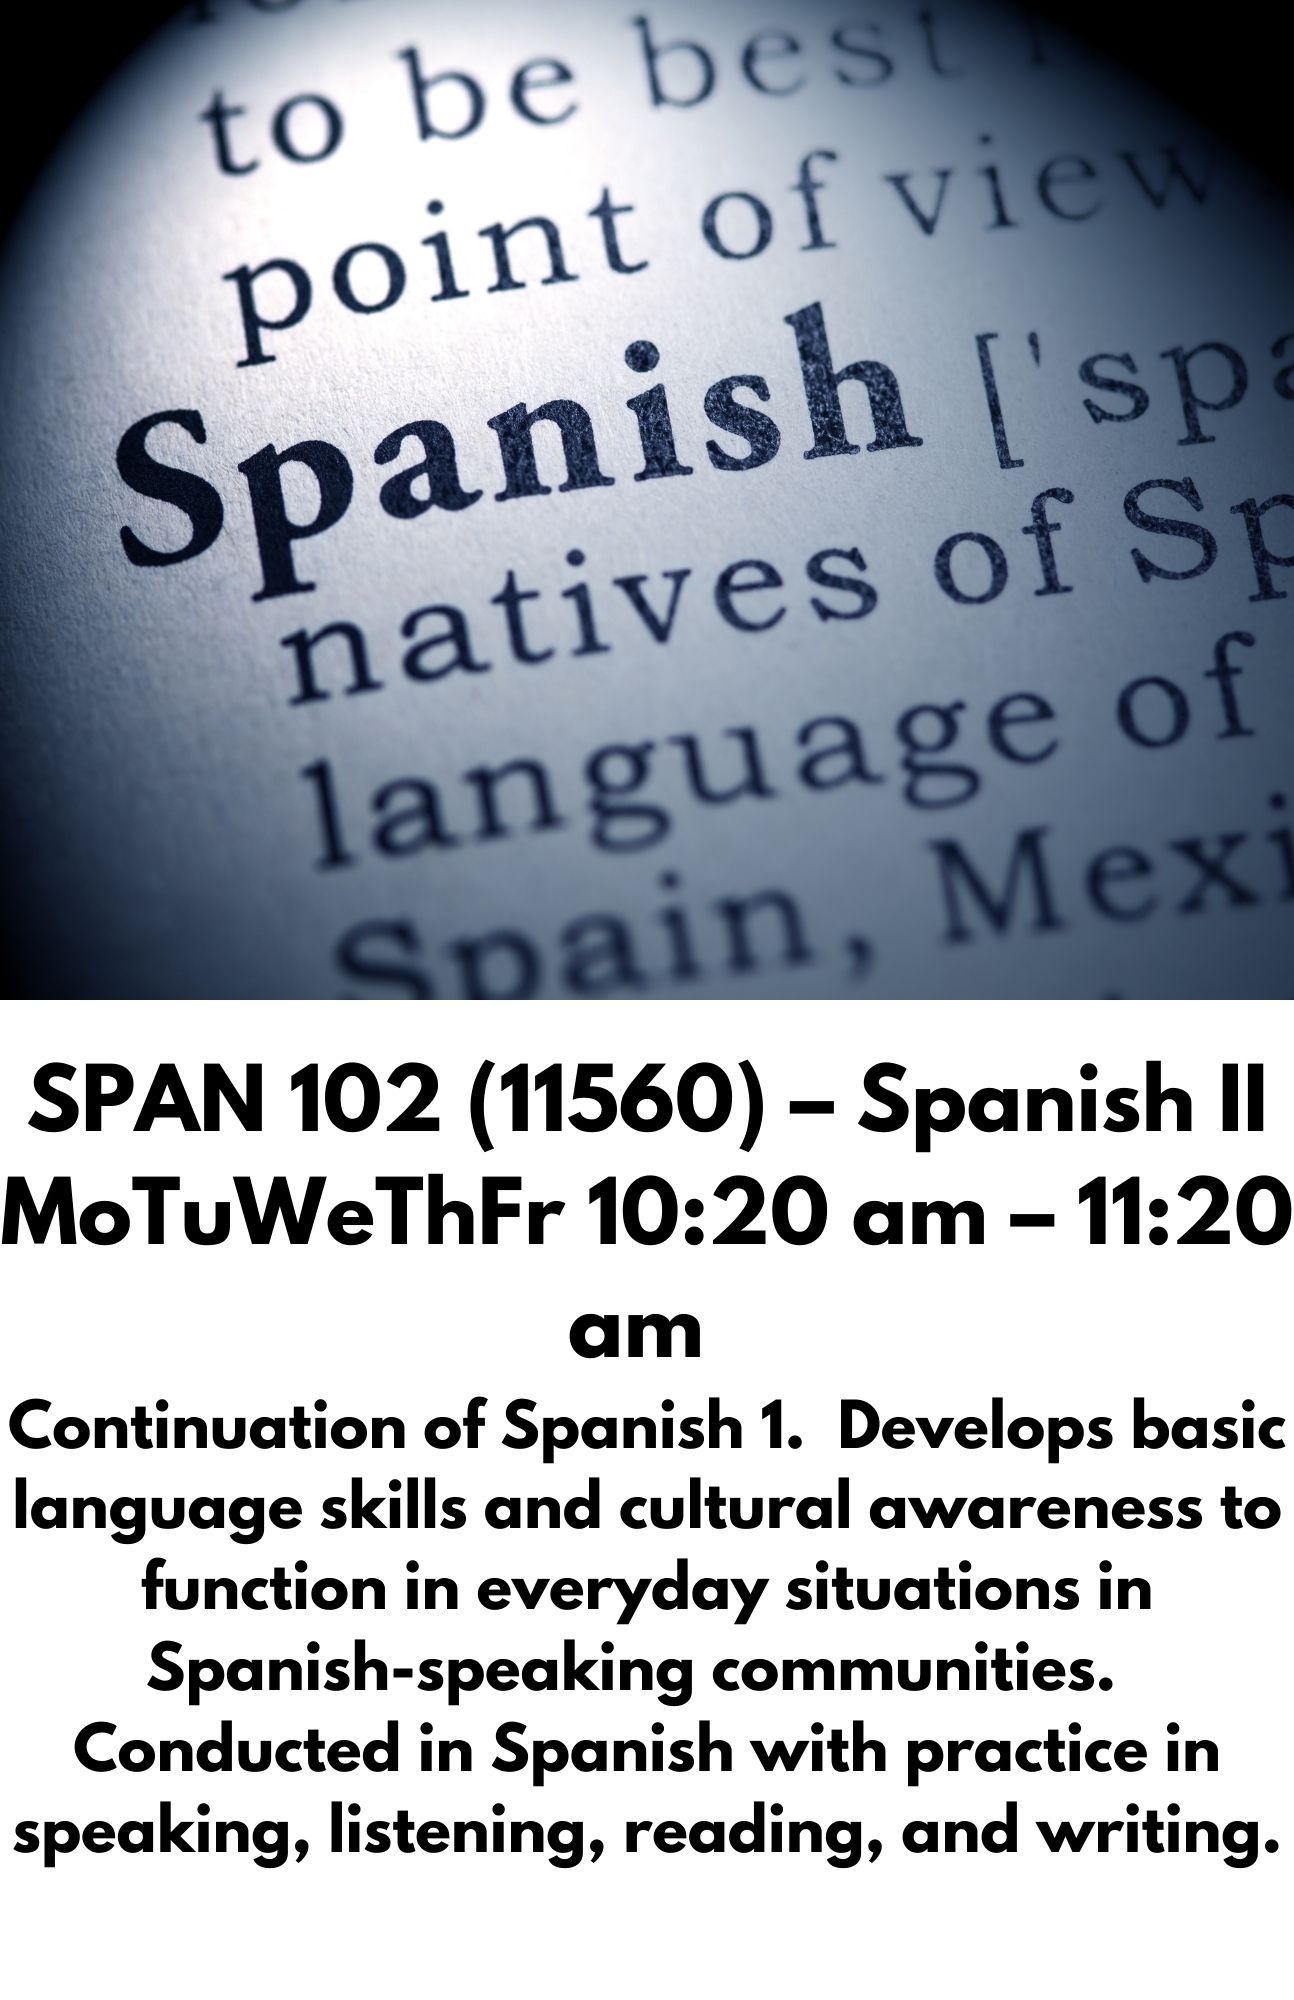 SPAN 102 (11560) – Spanish II MoTuWeThFr 10:20 am – 11:20 am  Continuation of Spanish 1.  Develops basic language skills and cultural awareness to function in everyday situations in Spanish-speaking communities.  Conducted in Spanish with practice in speaking, listening, reading, and writing.